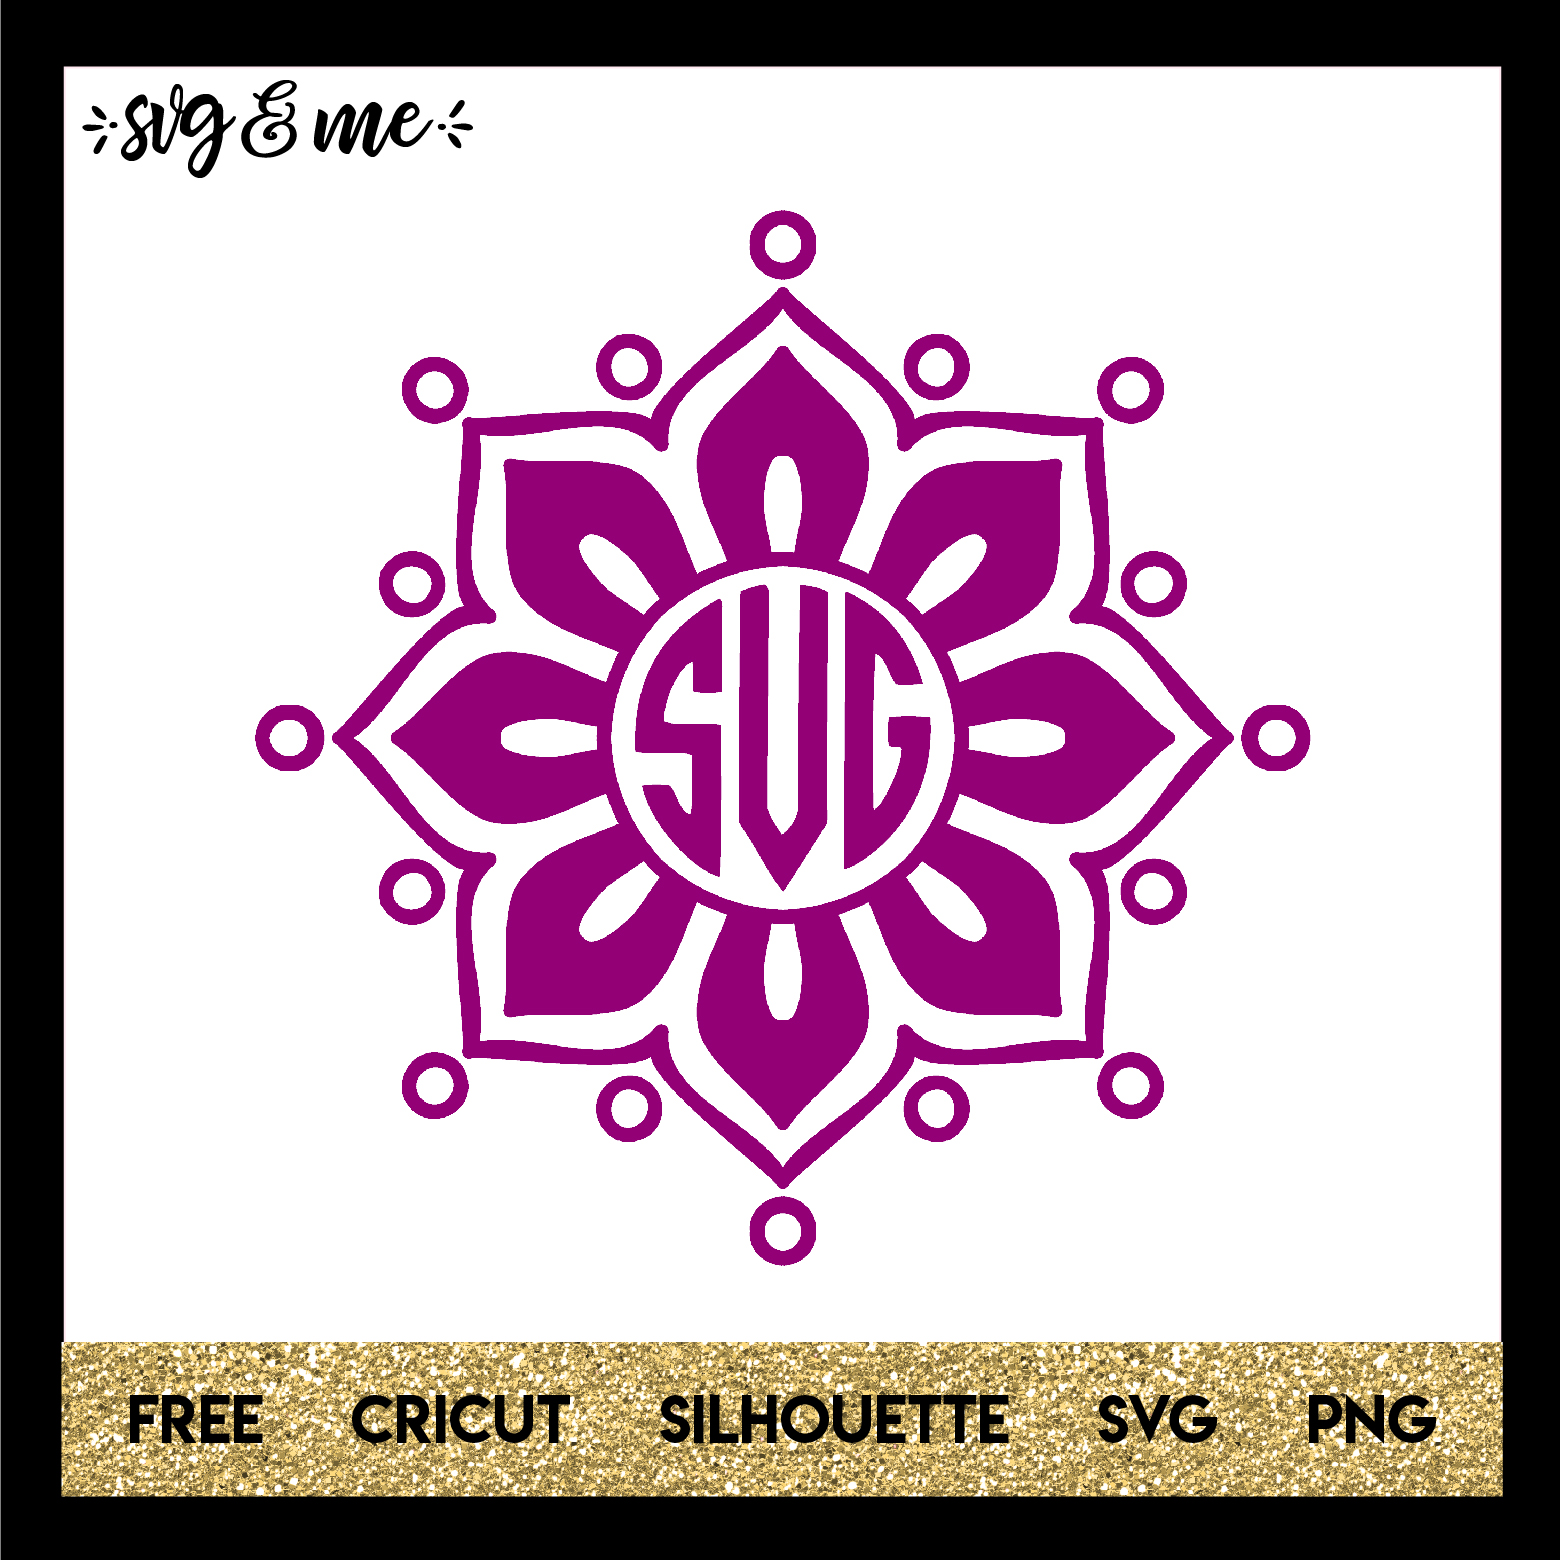 FREE SVG CUT FILE for Cricut, Silhouette and more - Floral Mandala Monogram SVG